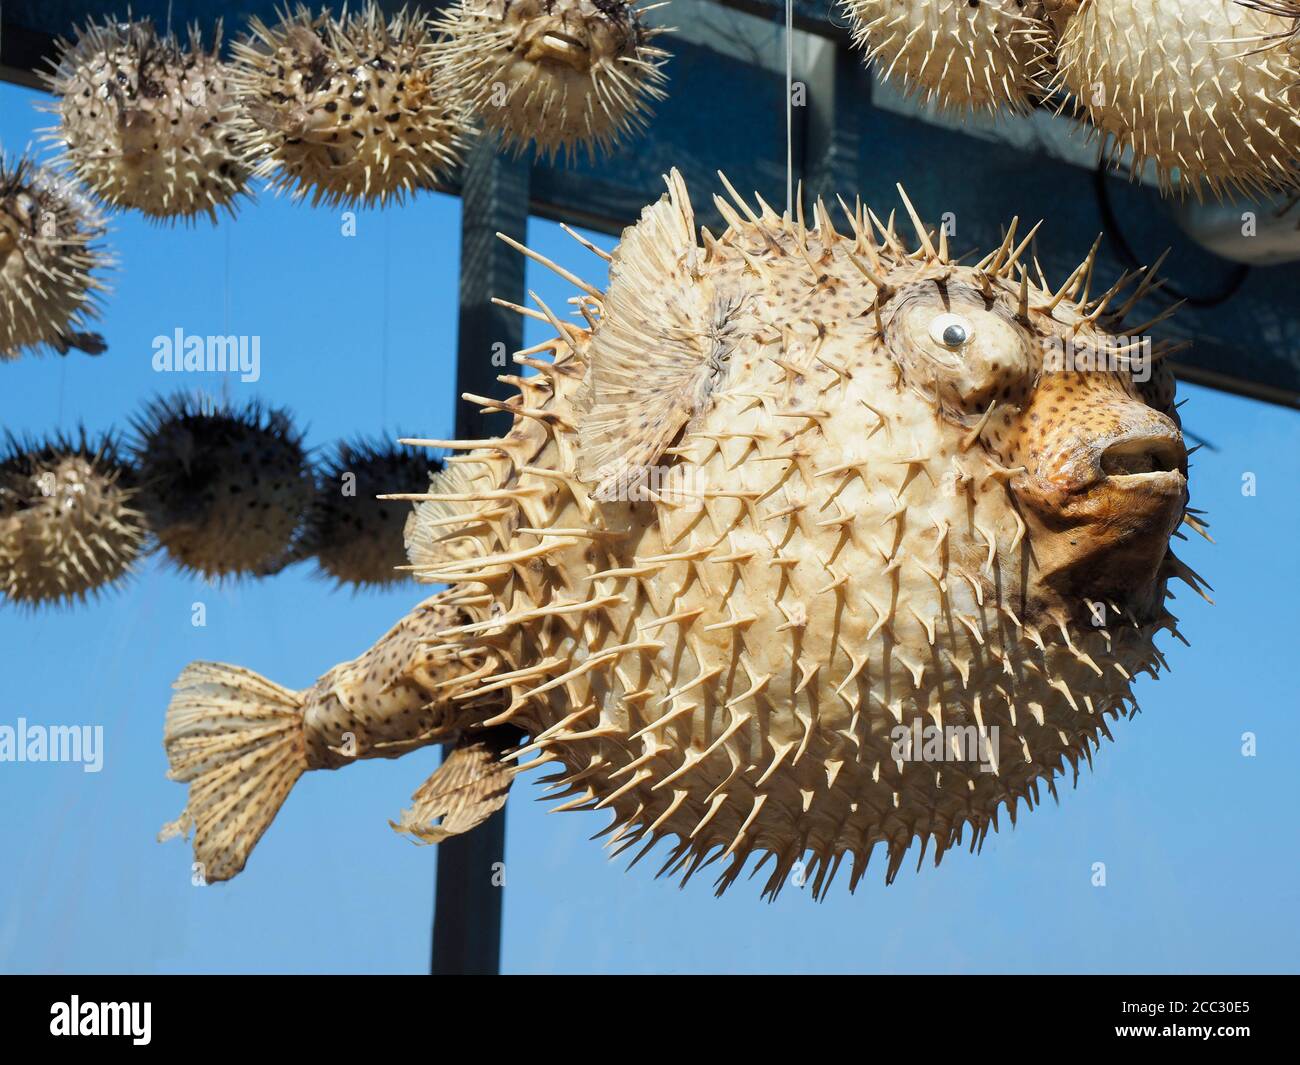 Dried Puffer Fish in Crete Sold as Souvenirs Stock Photo